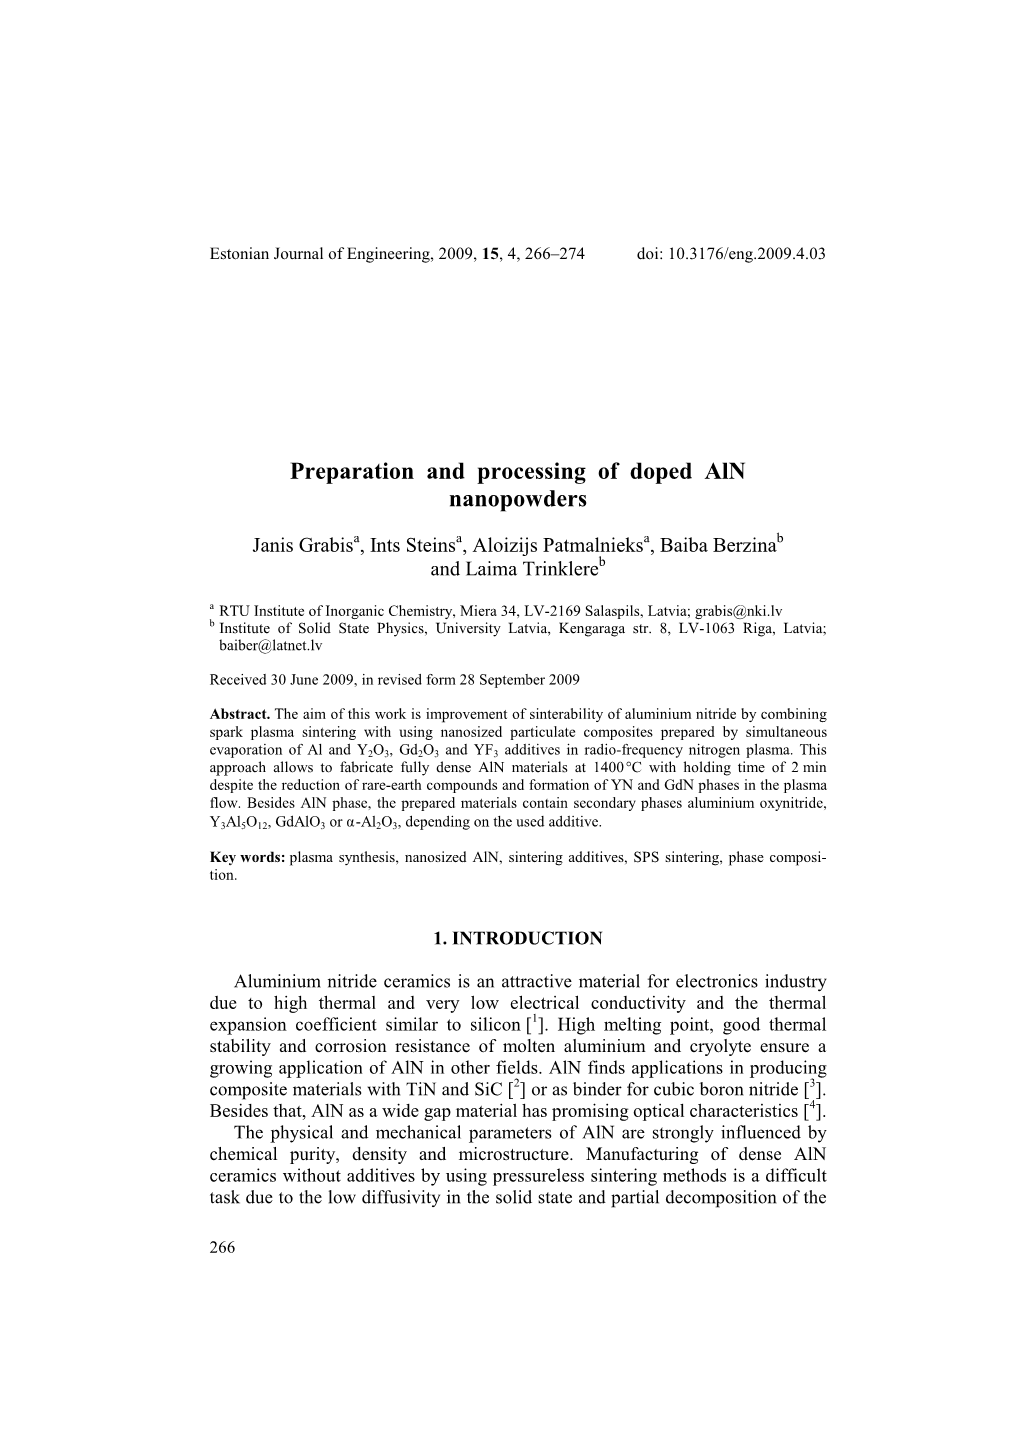 Preparation and Processing of Doped Aln Nanopowders